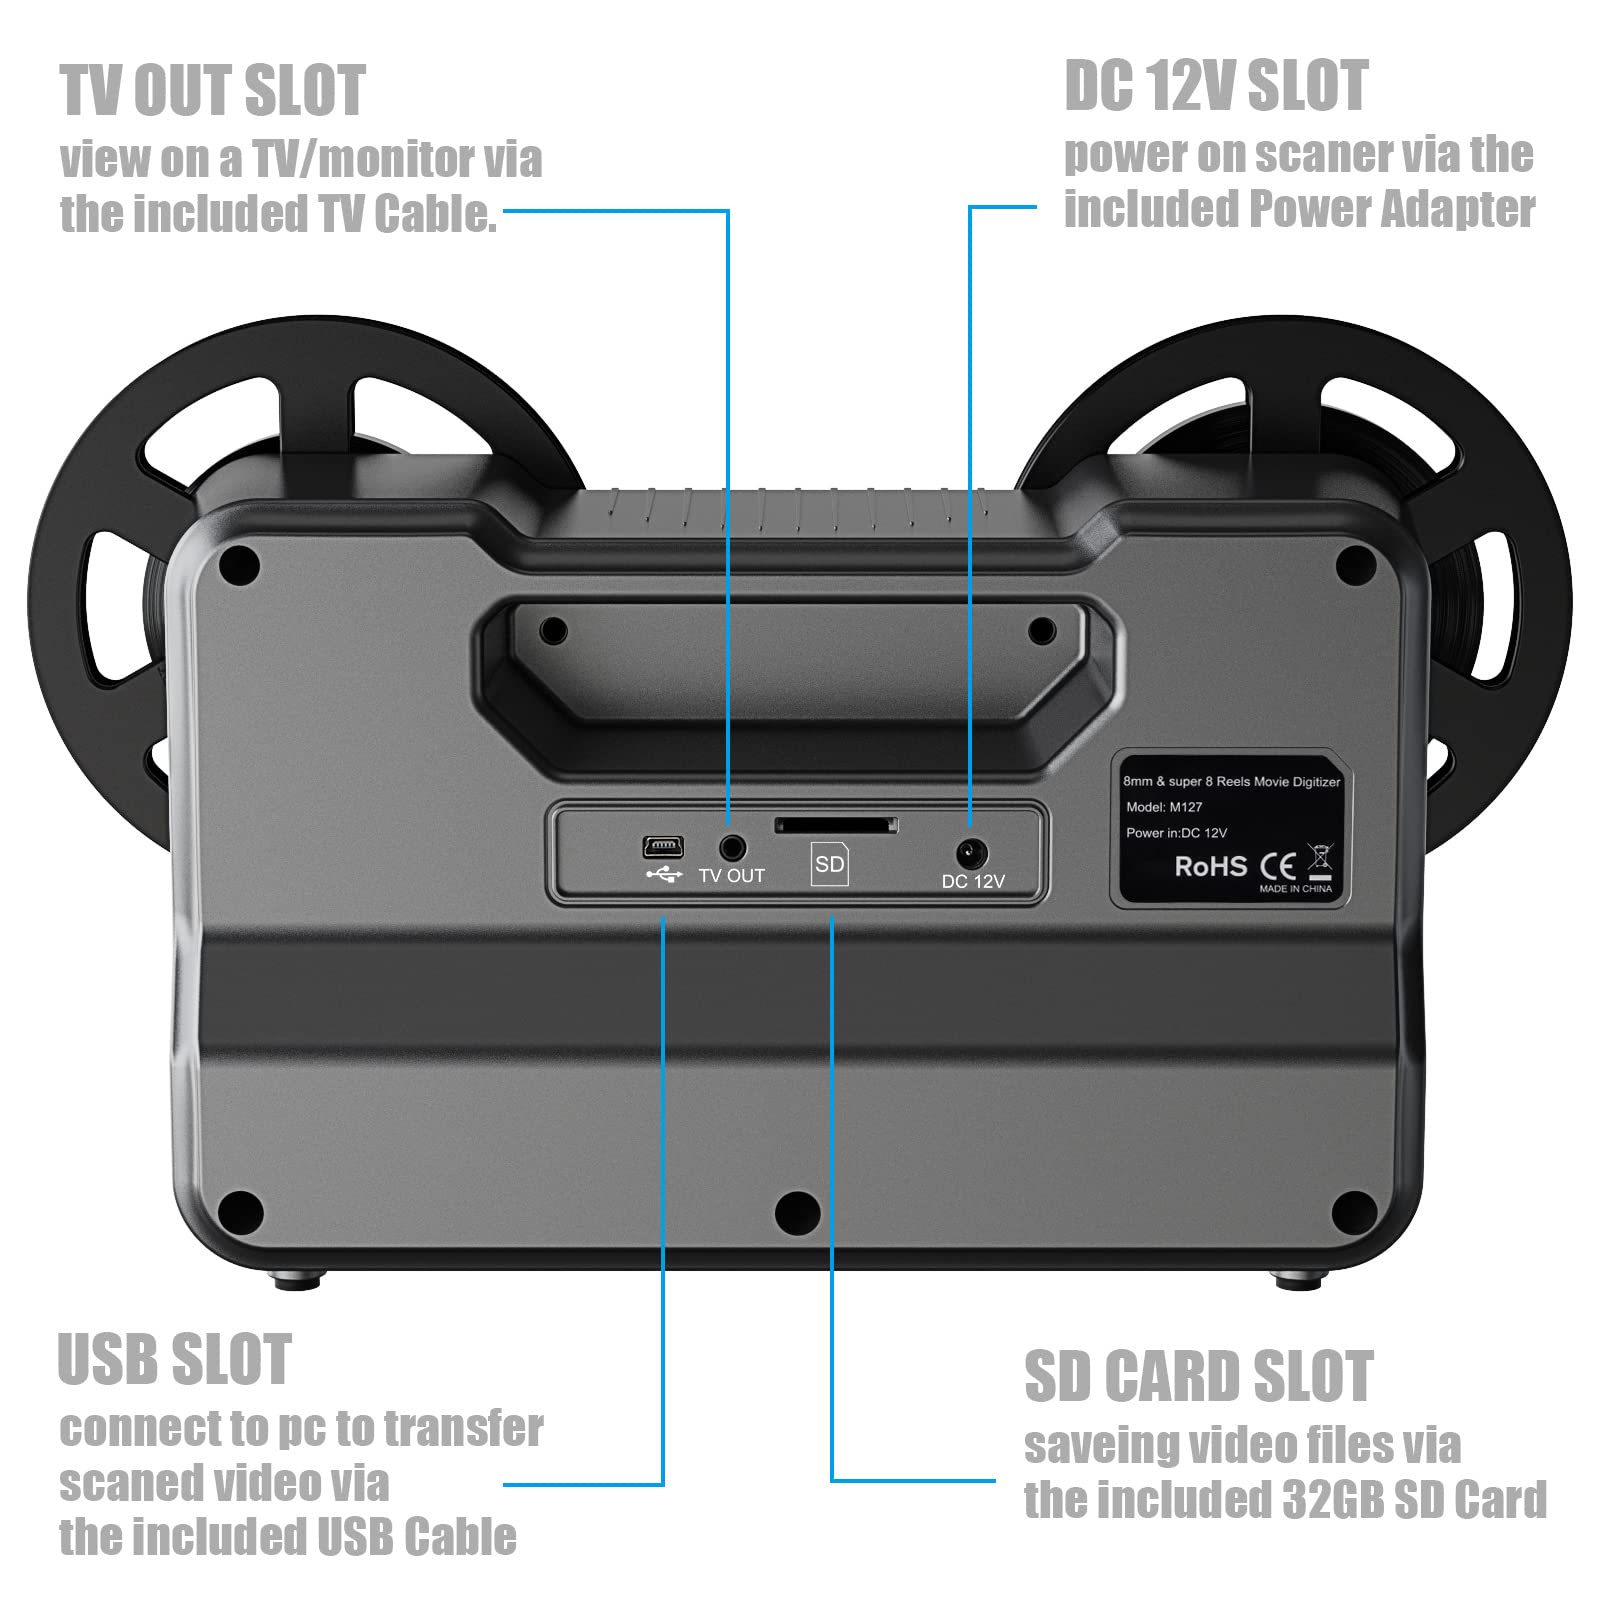 8mm & Super 8 Reels to Digital MovieMaker Film Sanner Converter, 2.4" LCD (Convert 3”and 5” Film reels) with 32 GB SD Card included